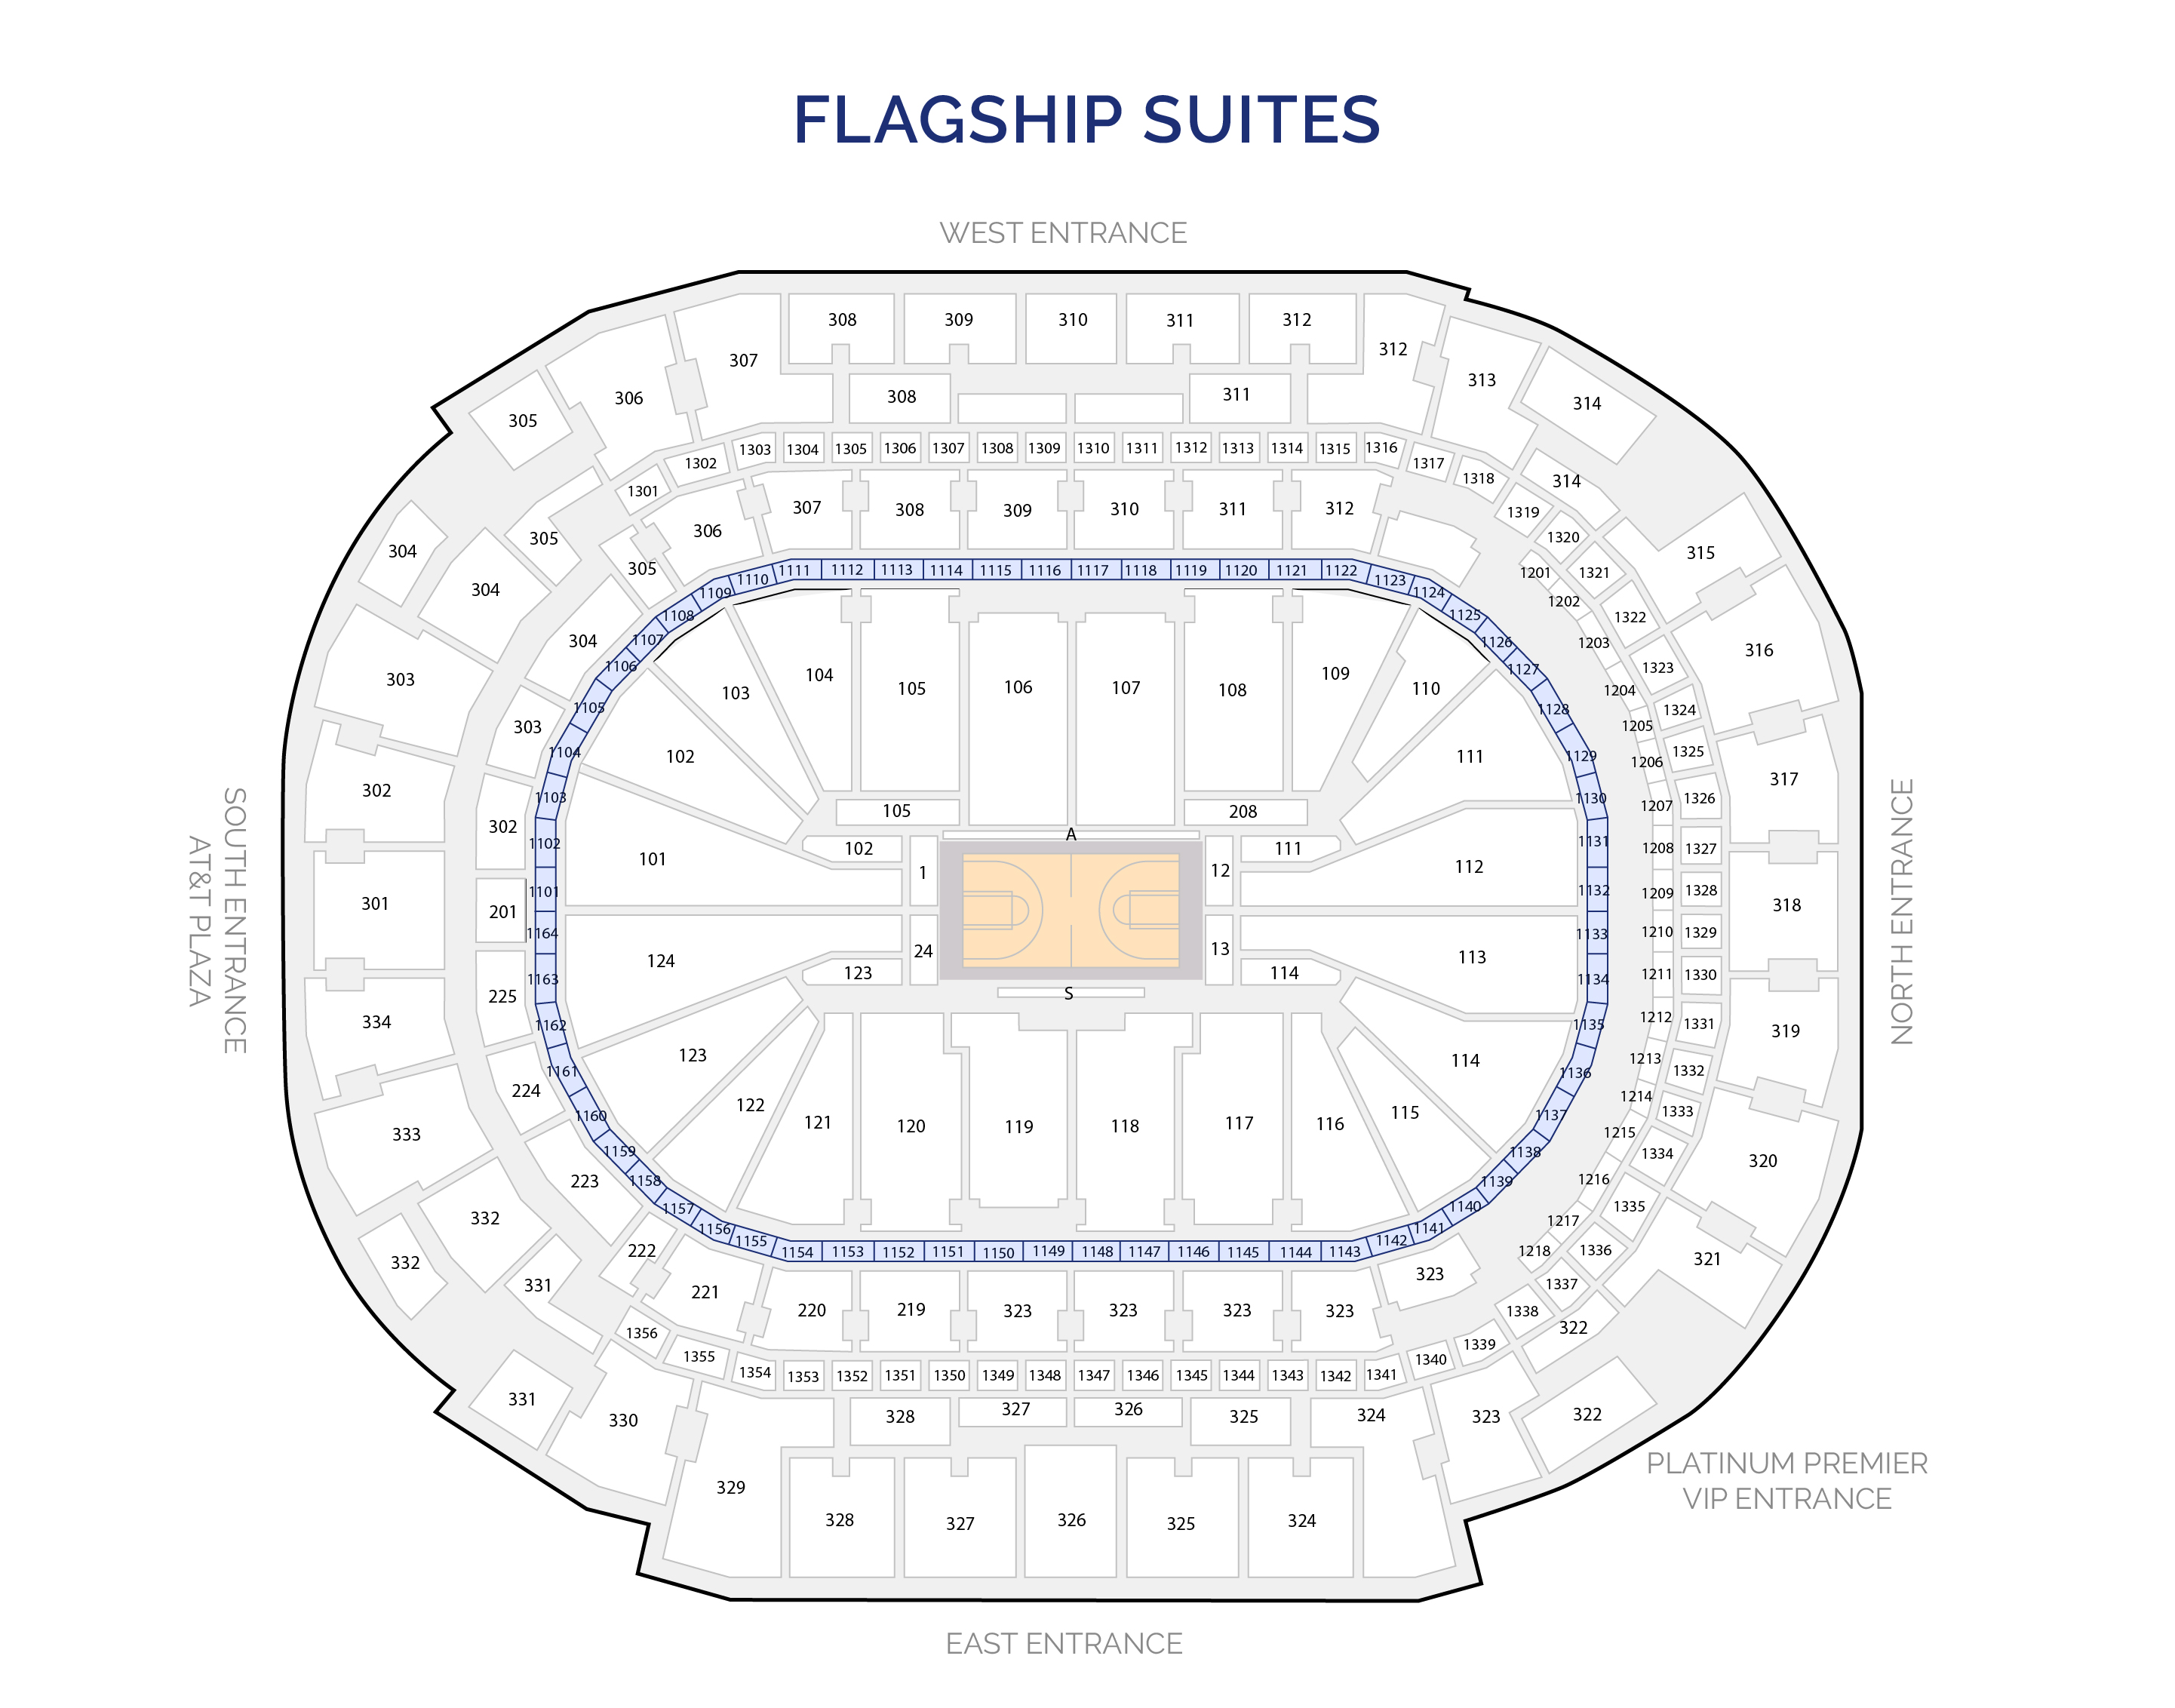 Where To Find American Airlines Center Premium and Club Seating